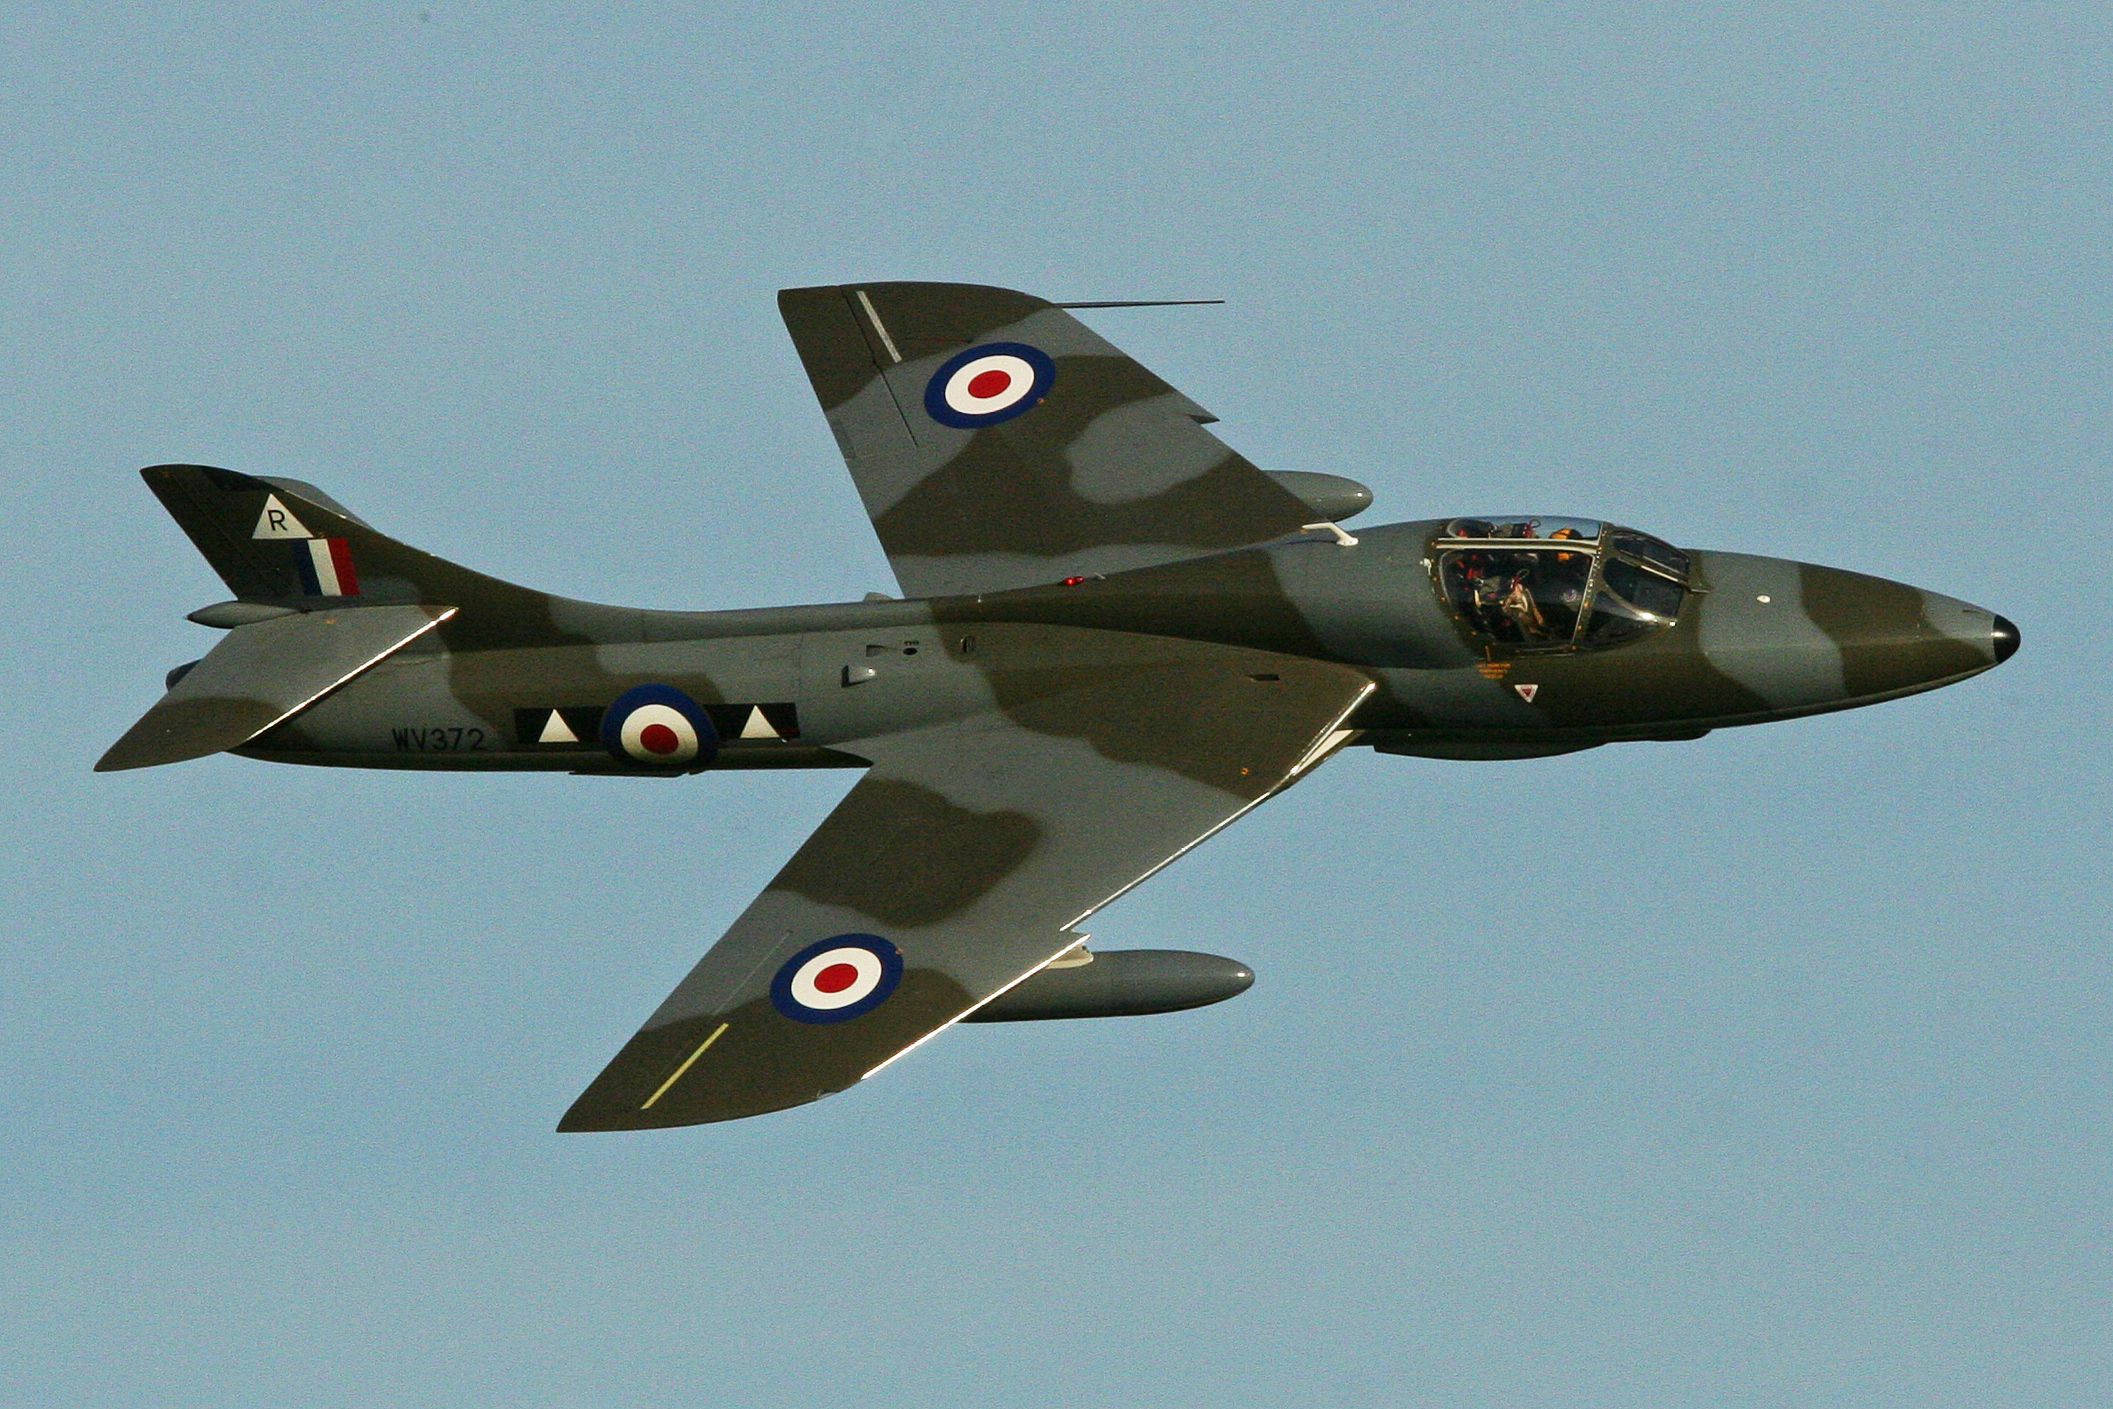 A Hawker Hunter T7 Flying in the sky.